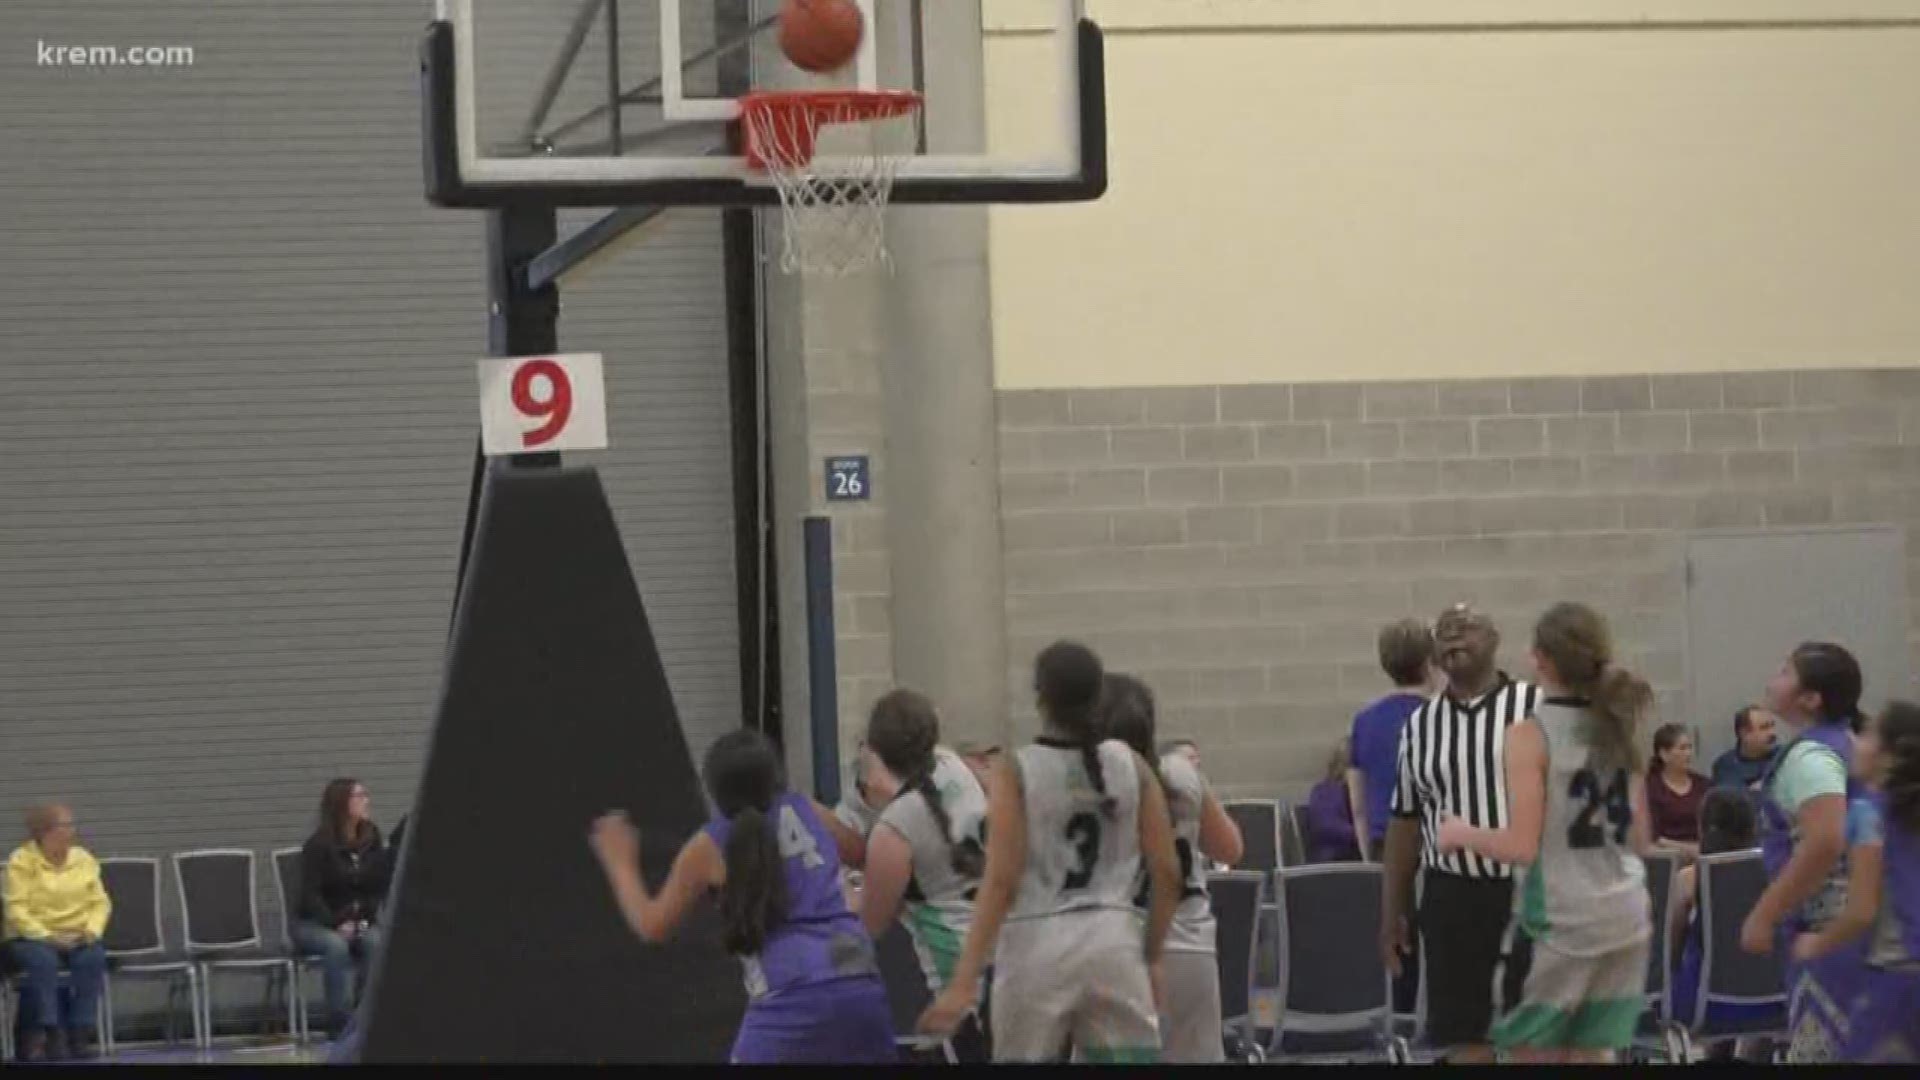 KREM 2 Reporter Shayna Waltower went to the Spokane Convention Center, where thousands of middle school basketball players converged for the state tournament.